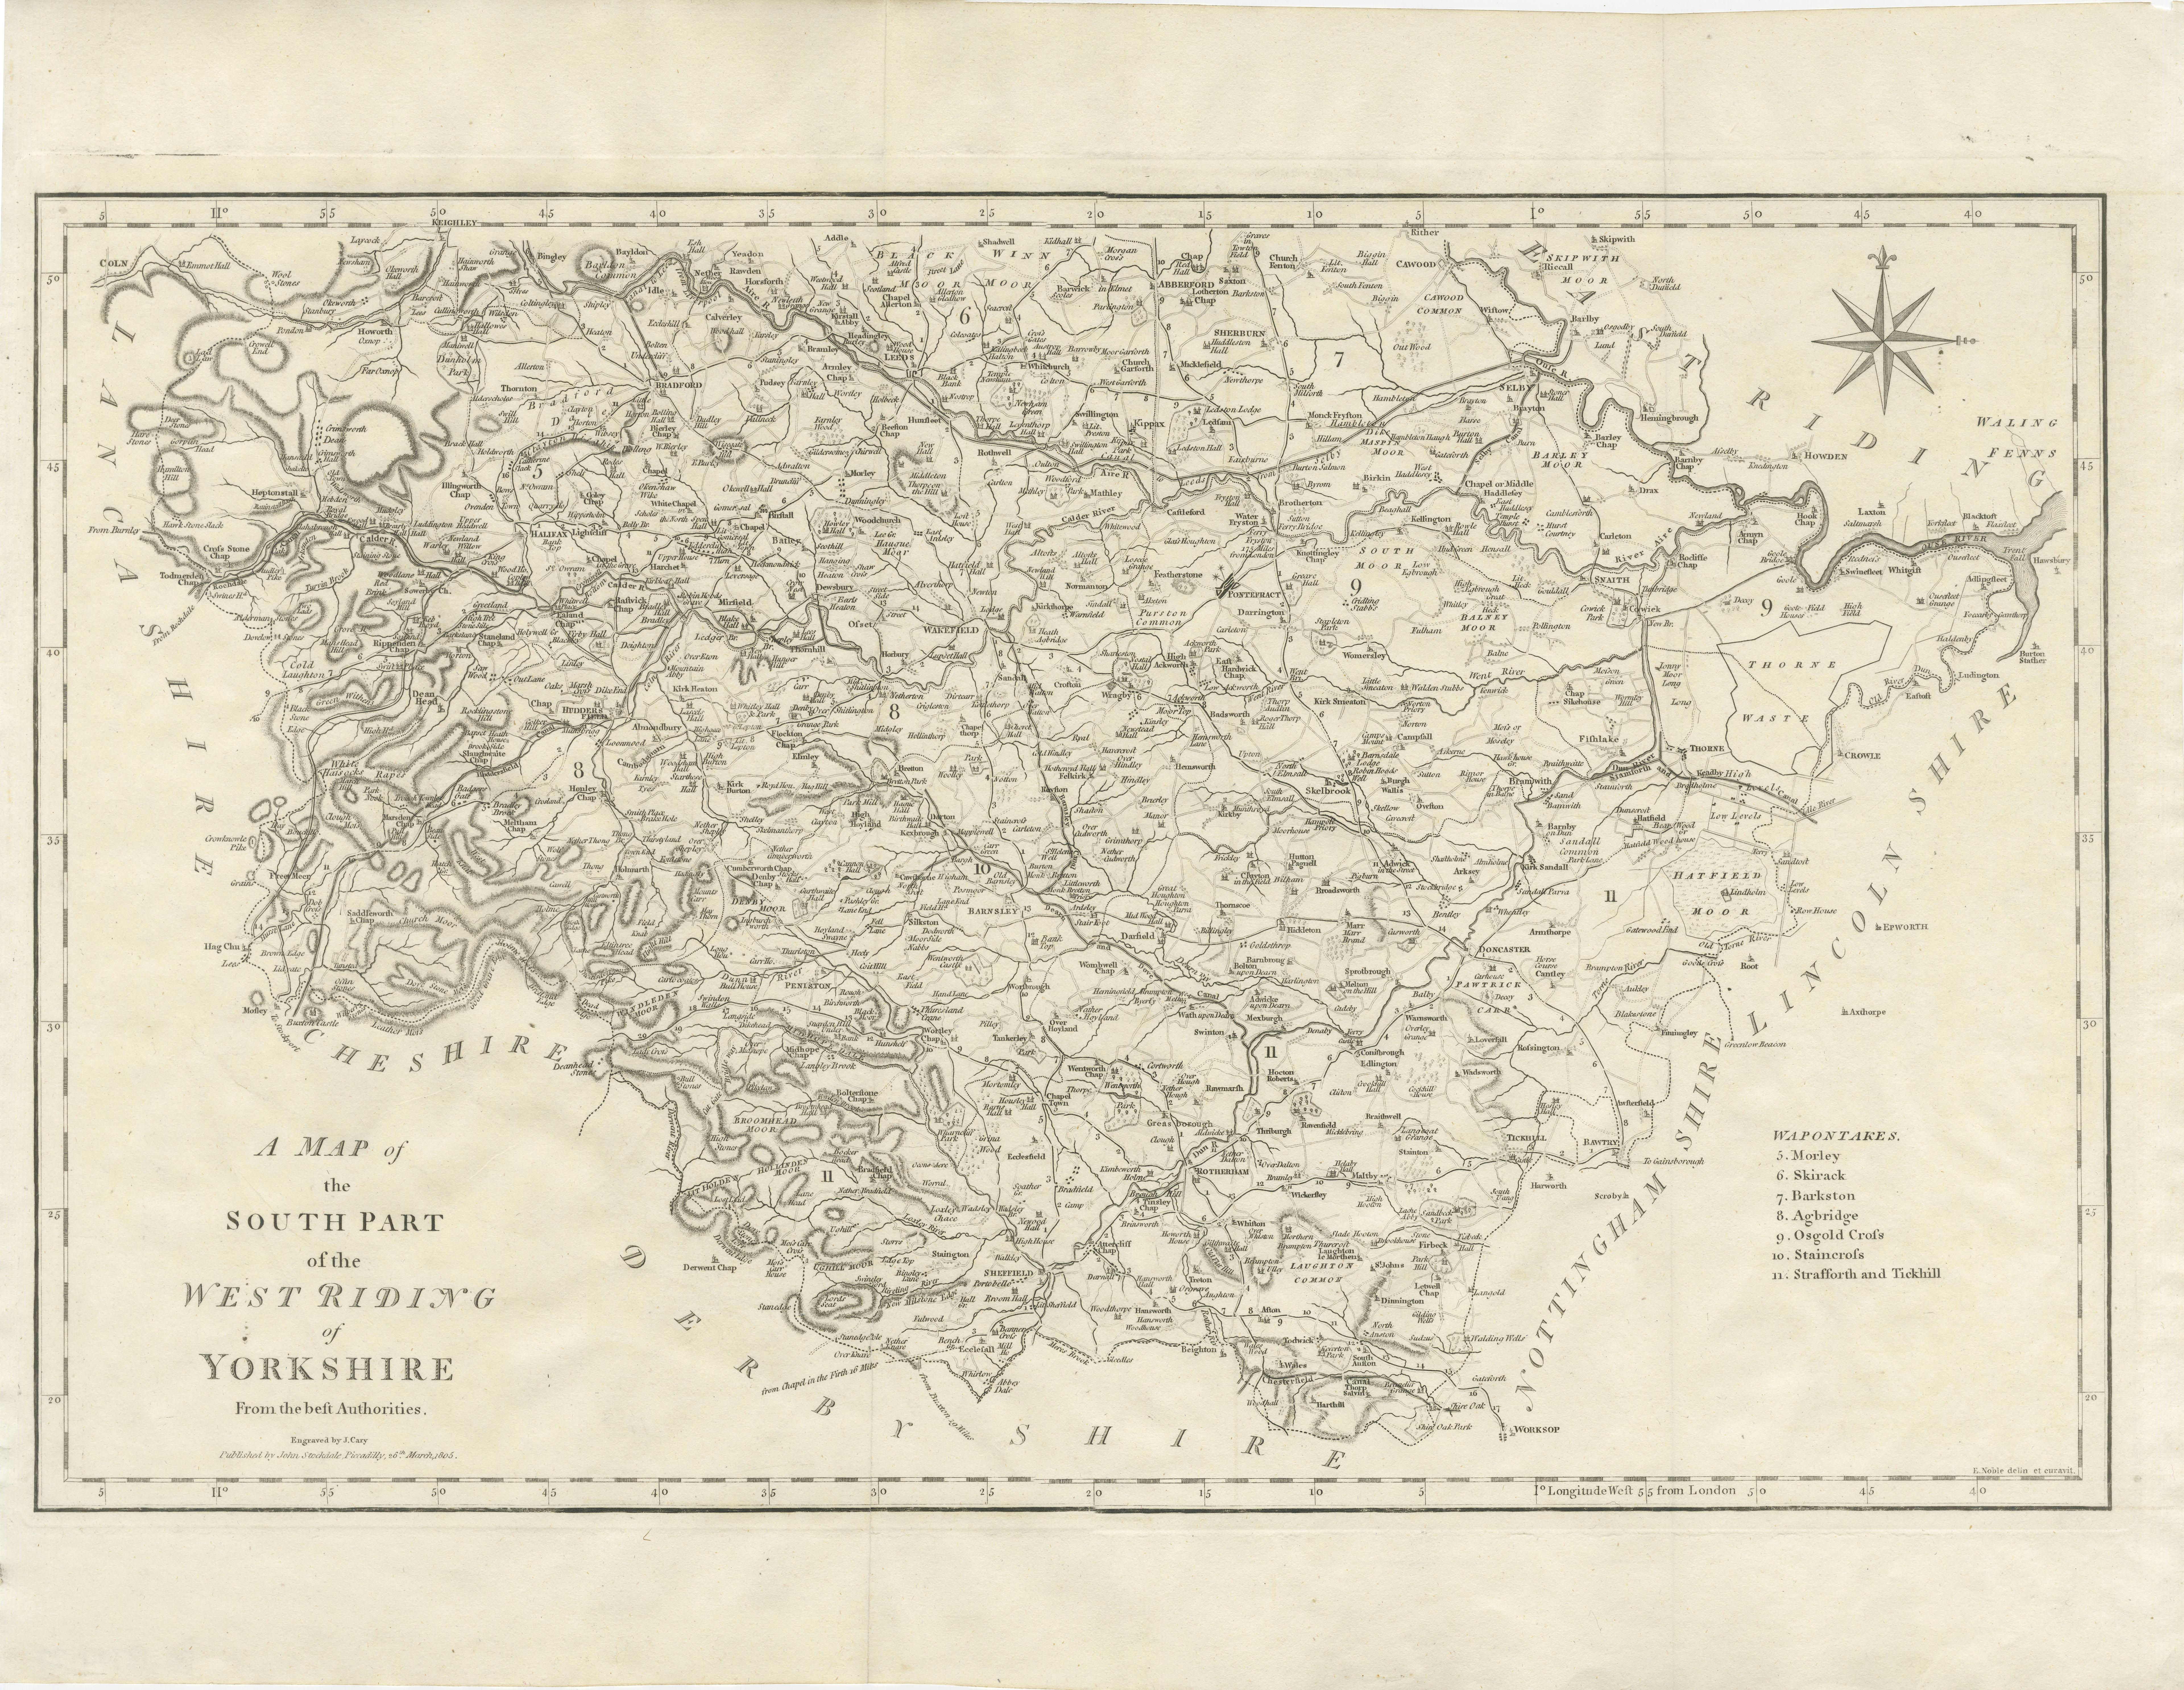 Antique map titled 'A Map of the South Part of the West Riding of Yorkshire from the best Authorities'. Original old county map of the south part of the West Riding of Yorkshire, England. Engraved by John Cary. Originates from 'New British Atlas' by